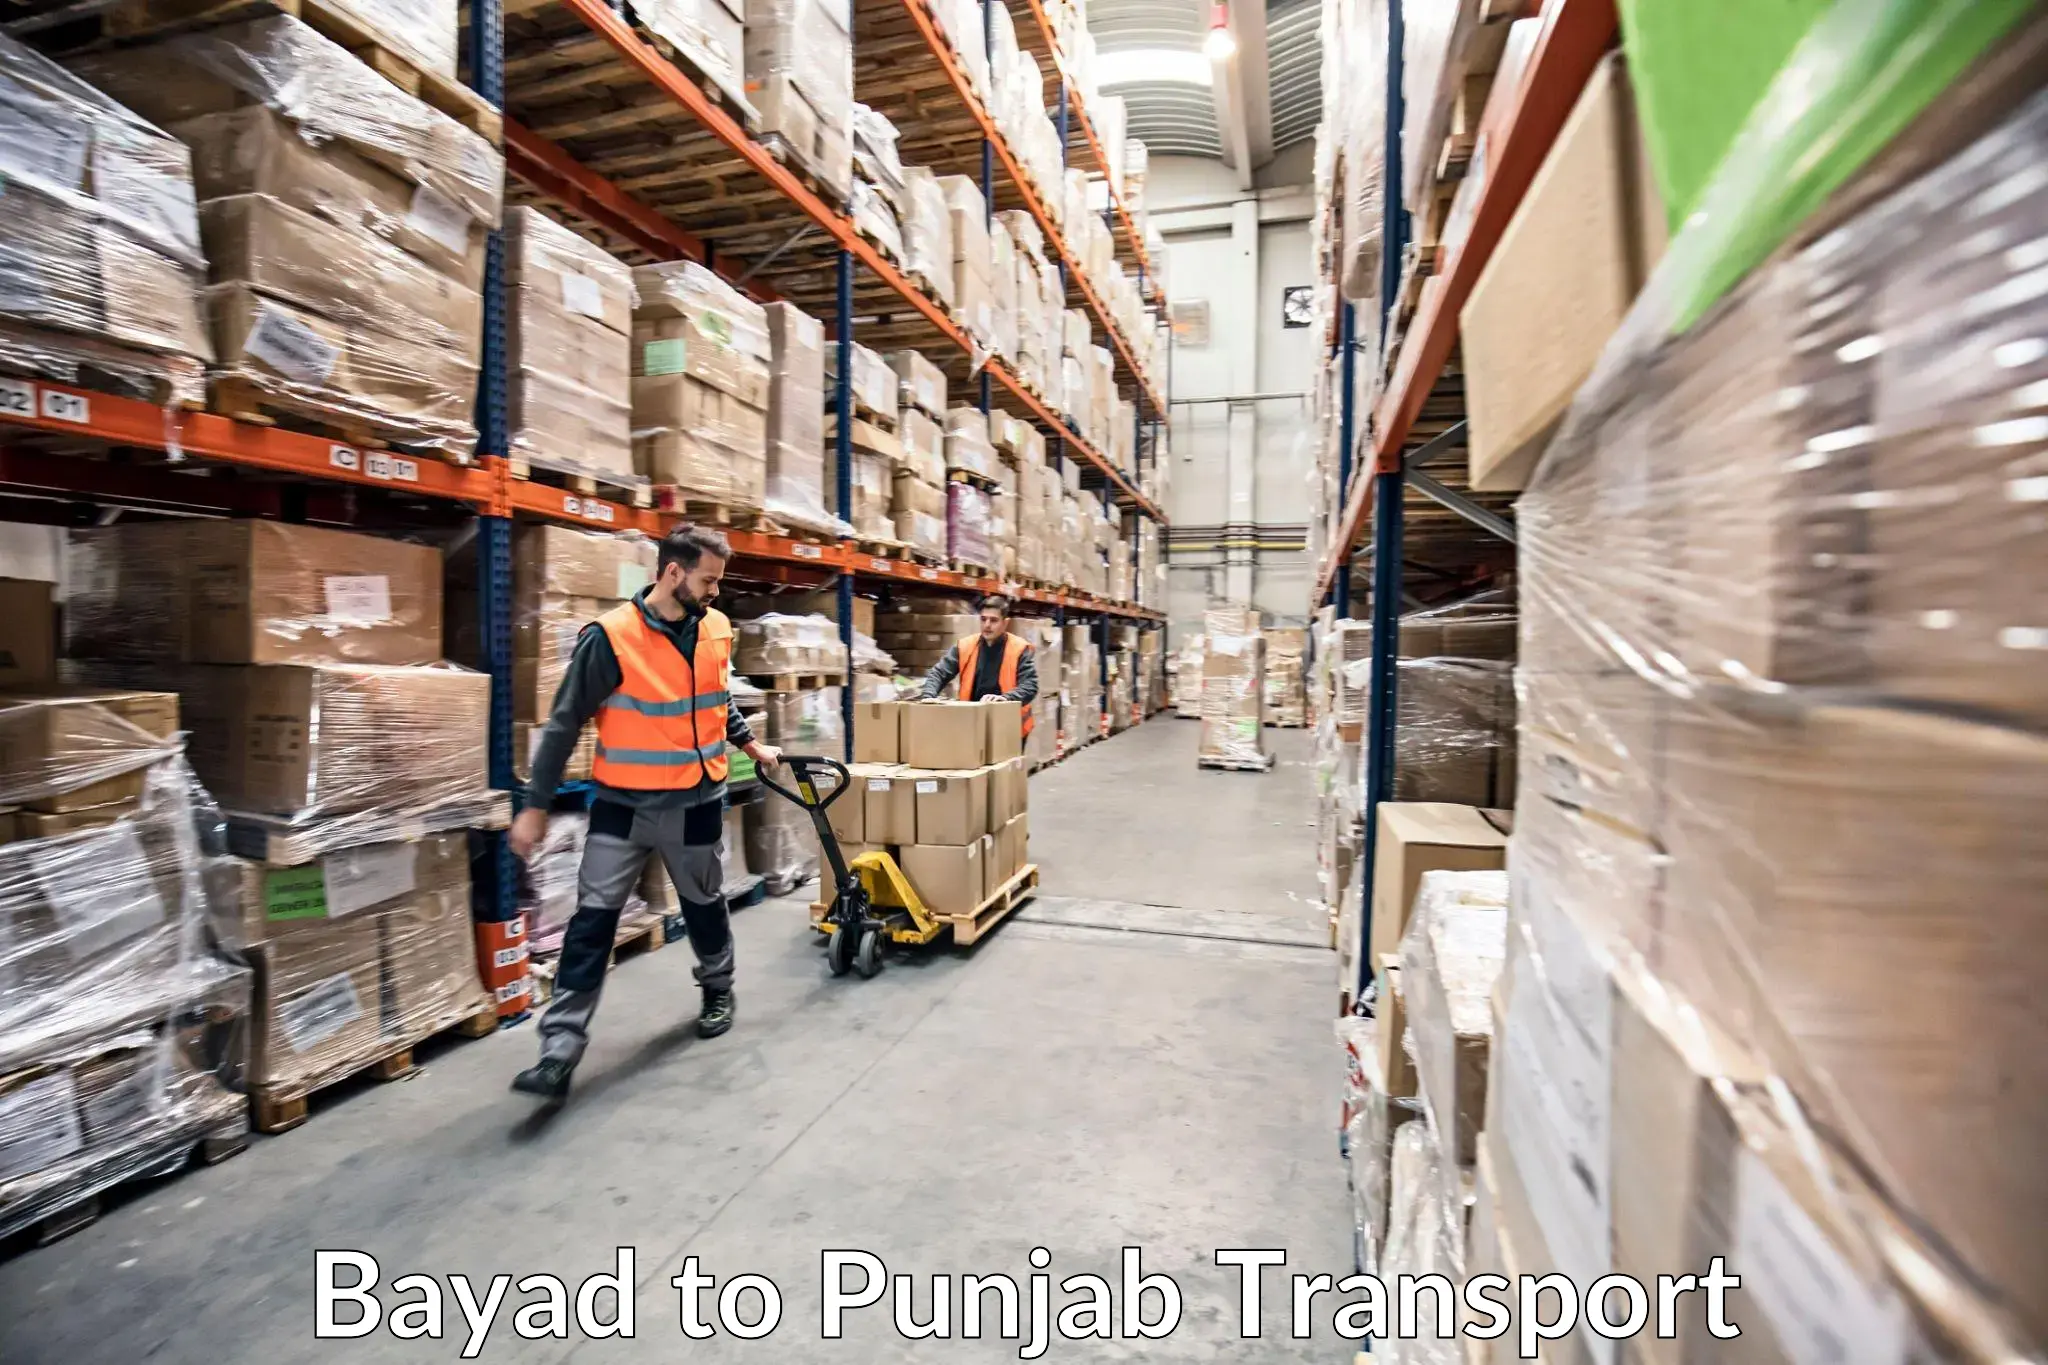 Truck transport companies in India Bayad to Abohar